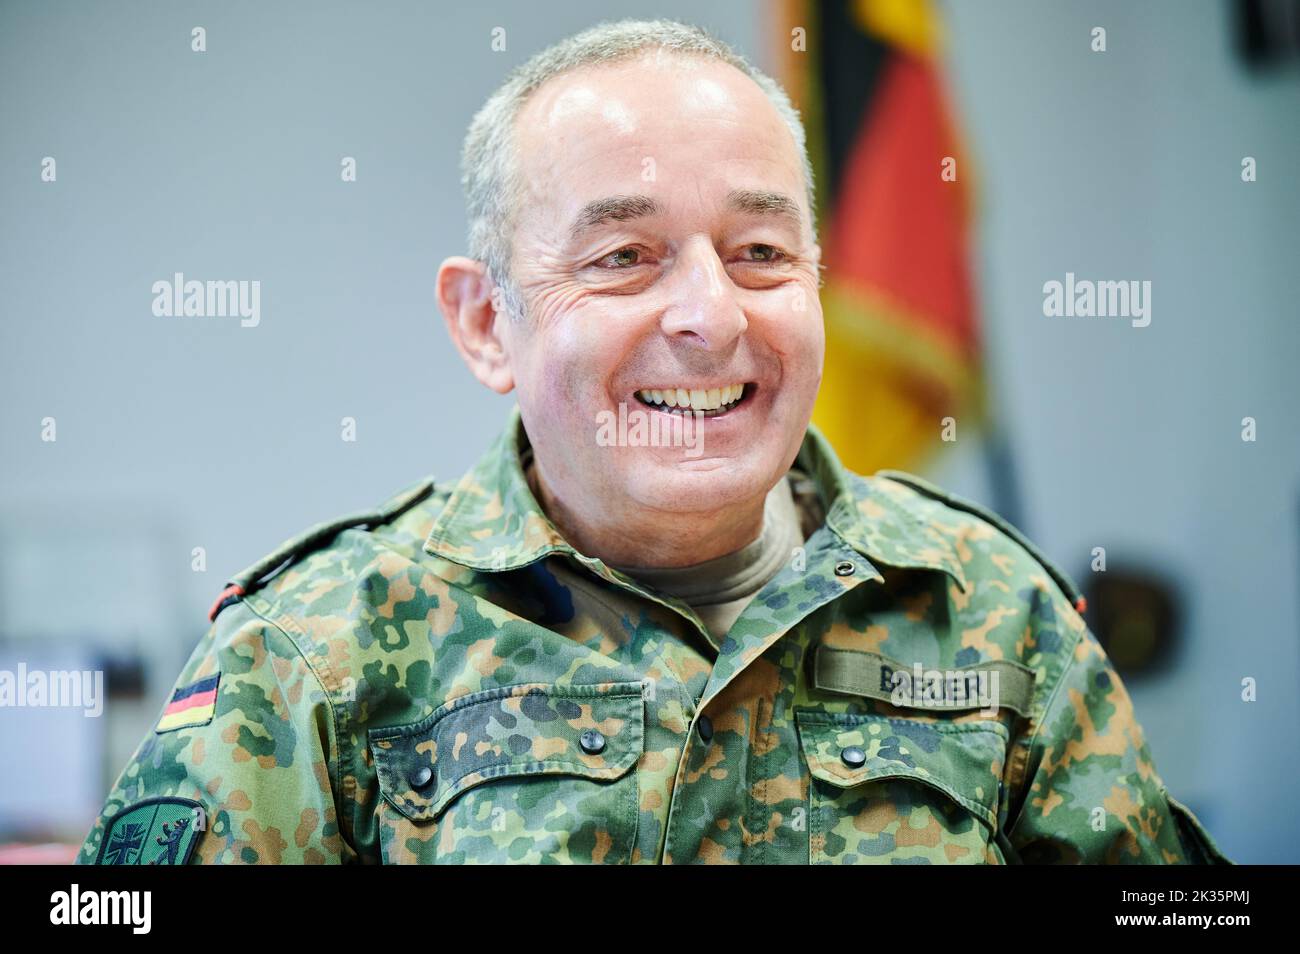 Berlin, Germany. 23rd Sep, 2022. Lieutenant General Carsten Breuer, commander of the new Territorial Command, sits in his office at Julius Leber Barracks. Following the Russian attack on Ukraine, the forces are being refocused on national and alliance defense. The new command has responsibility for operational command of forces - including the Army, Air Force, Navy, Medical Service and Cyber/Information Space - at Homeland Security. Credit: Annette Riedl/dpa/Alamy Live News Stock Photo